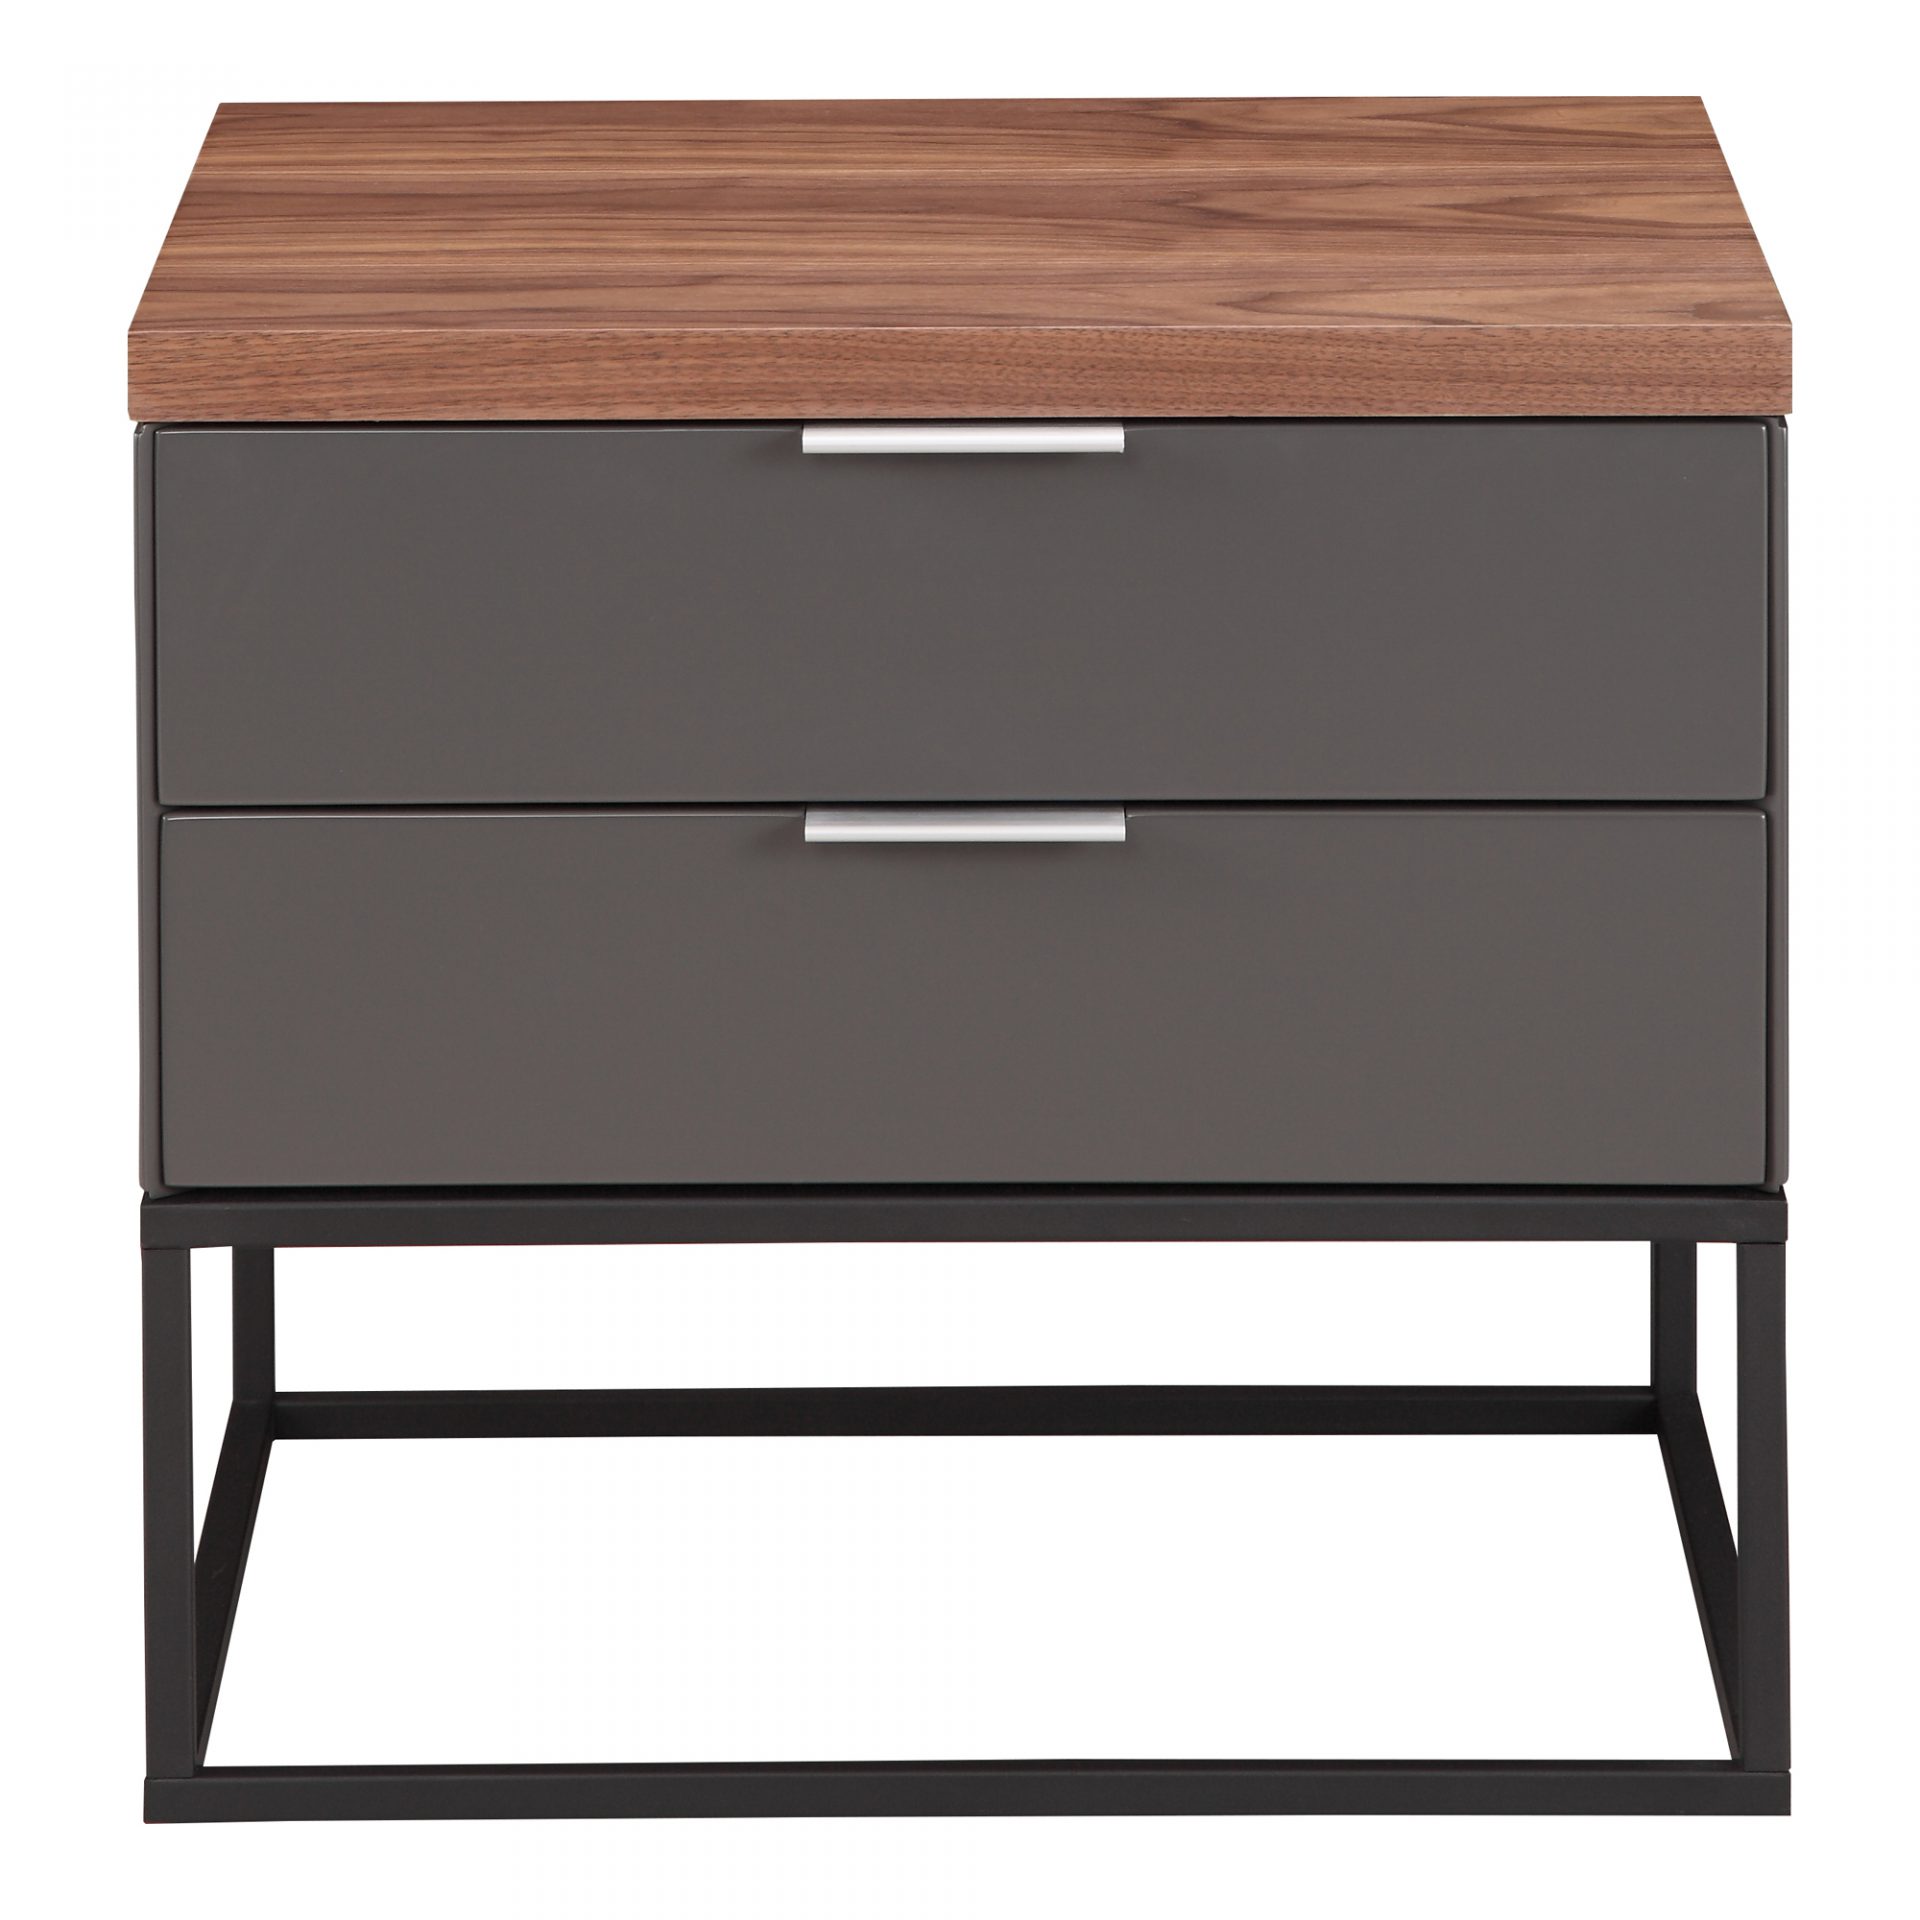 Leroy Side Table with Drawers